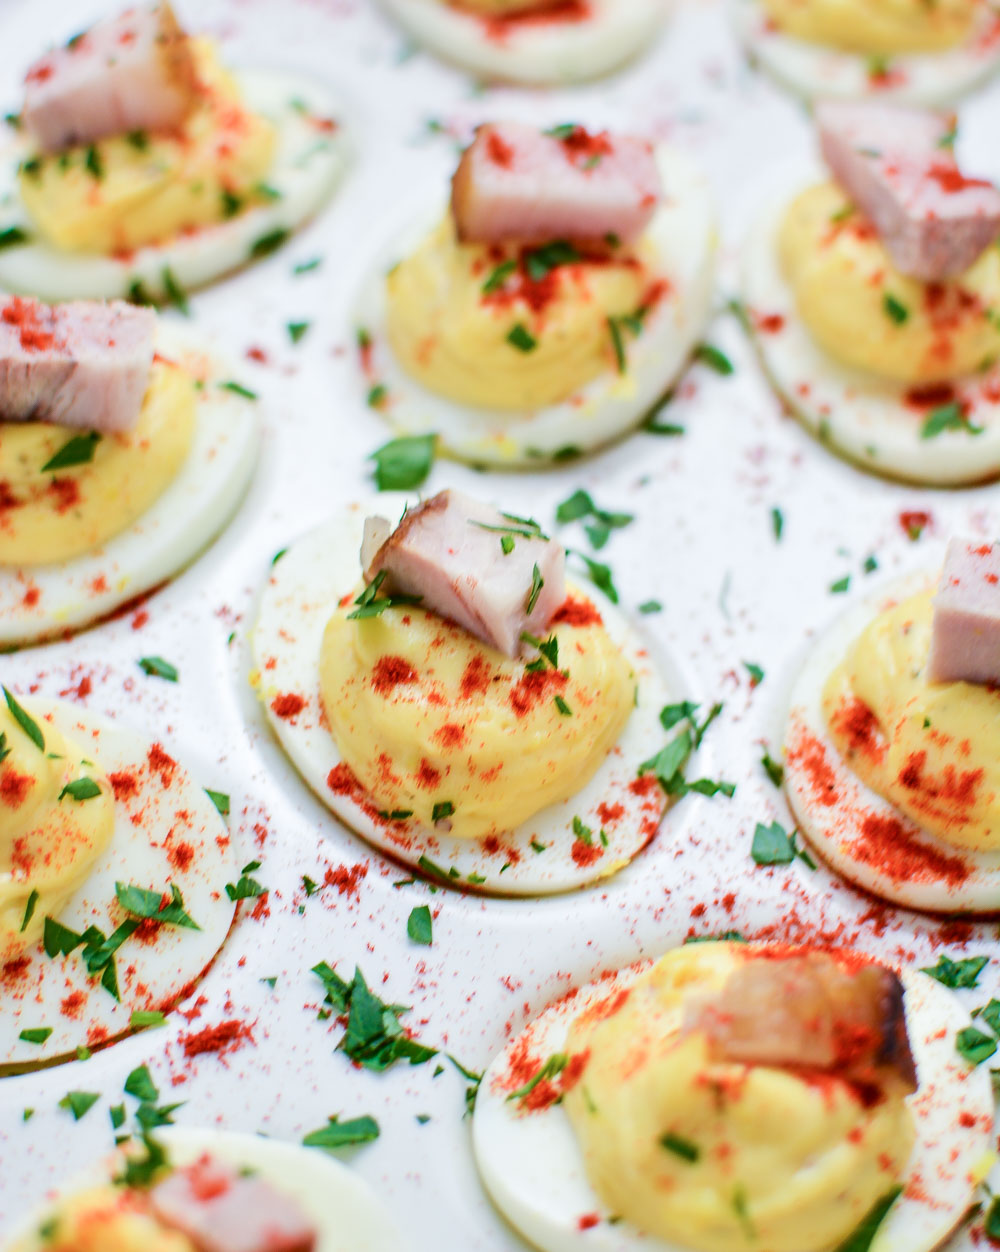 Beer-Braised Pork Belly Deviled Eggs are a must-have recipe for Easter brunch or your next spring or summer picnic!